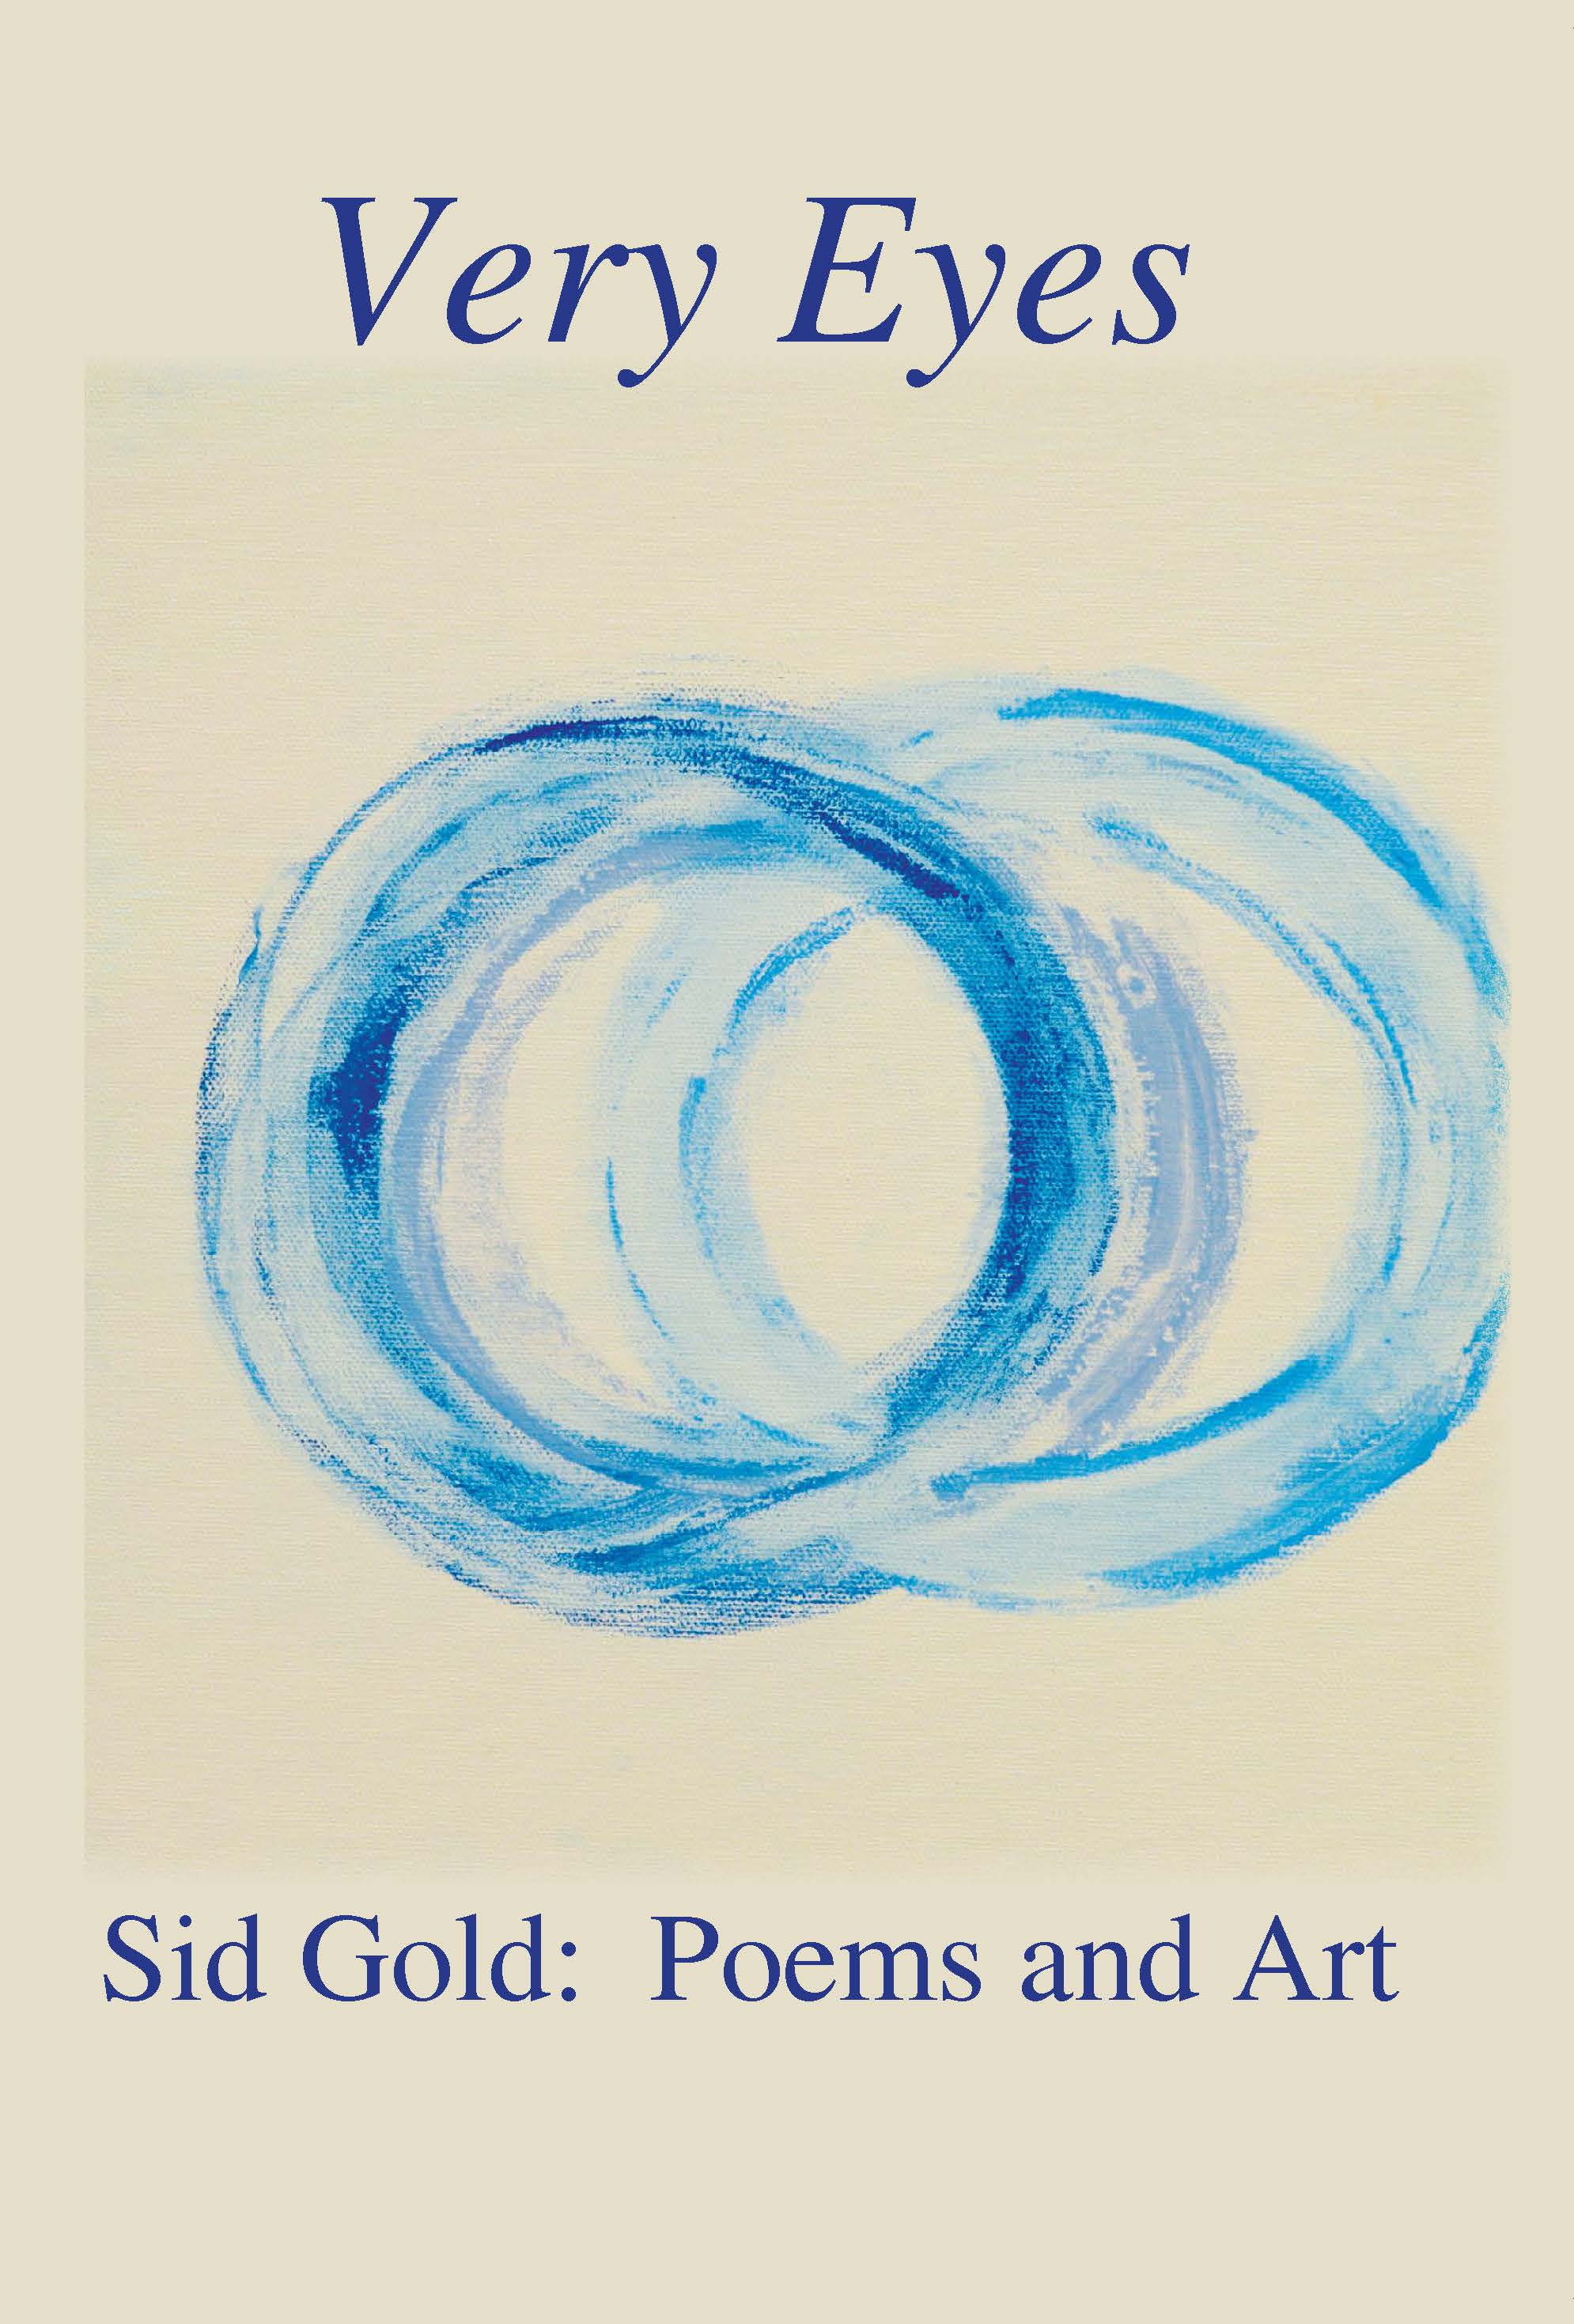 Sid Gold's "Very Eyes" Interlaces Lyric and Prose Poems with Abstract Paintings to Penetrate Humanity and Reflect on Our Times